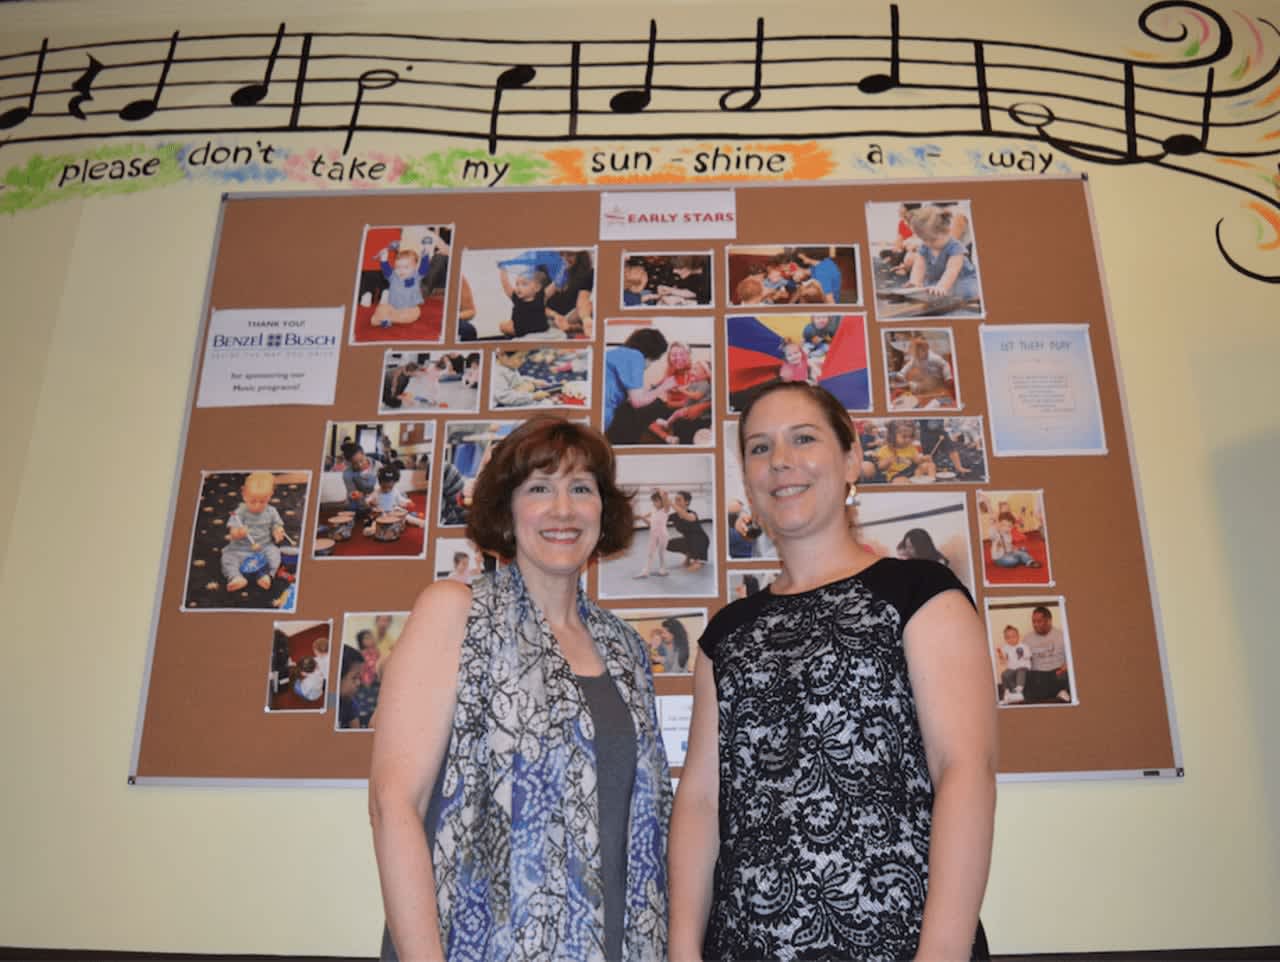 Wendy Bain and Performing Arts School Managing Director Becky Hinkle.